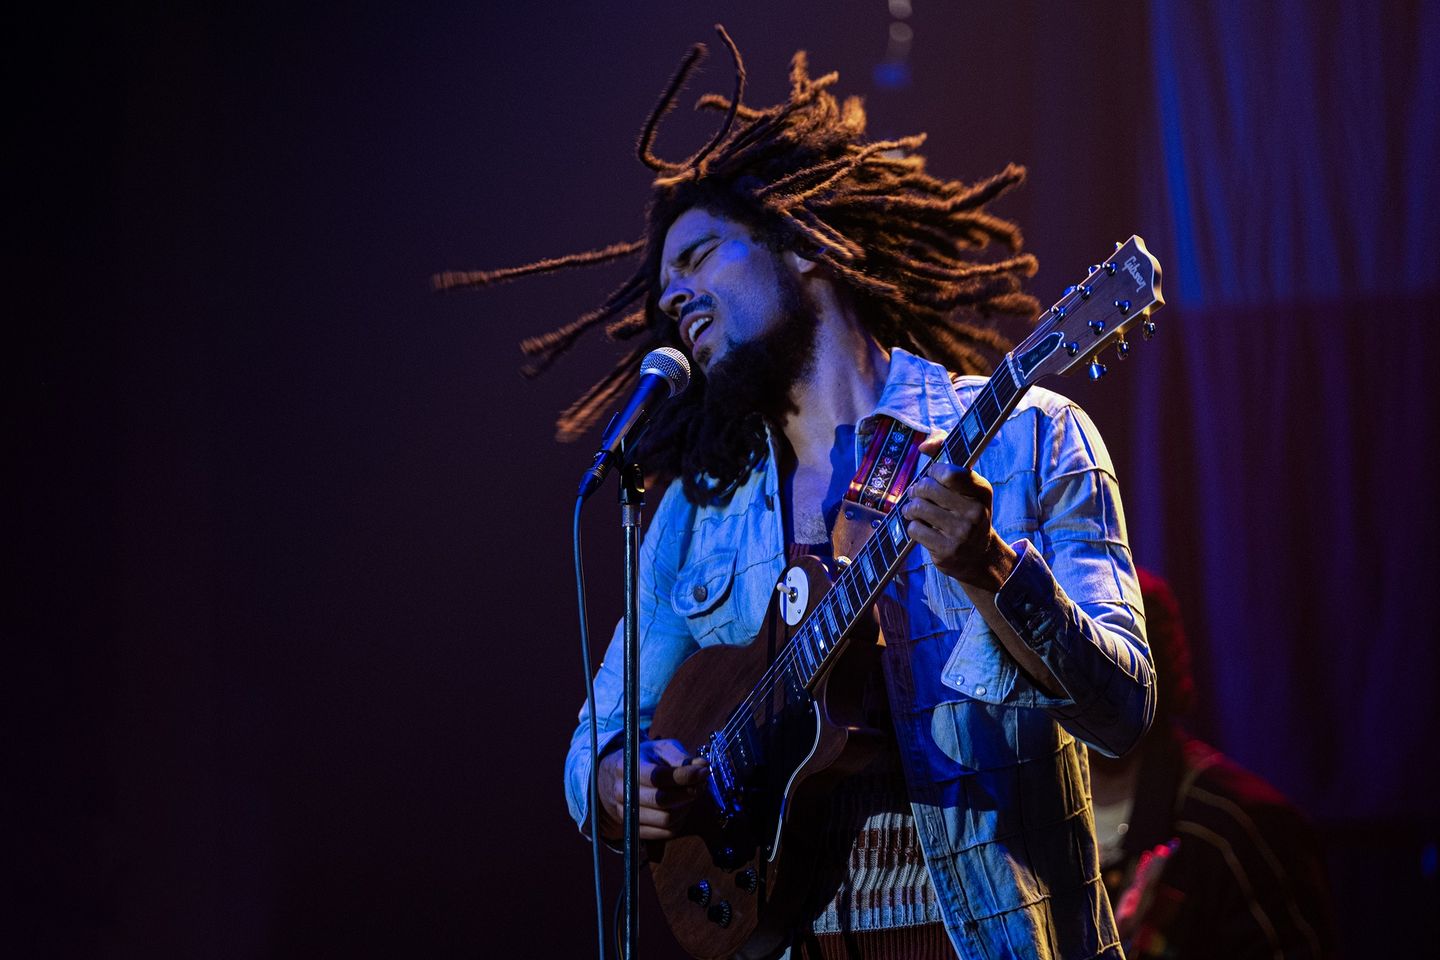 Dreadlocked artist rocking the stage with an electric guitar.